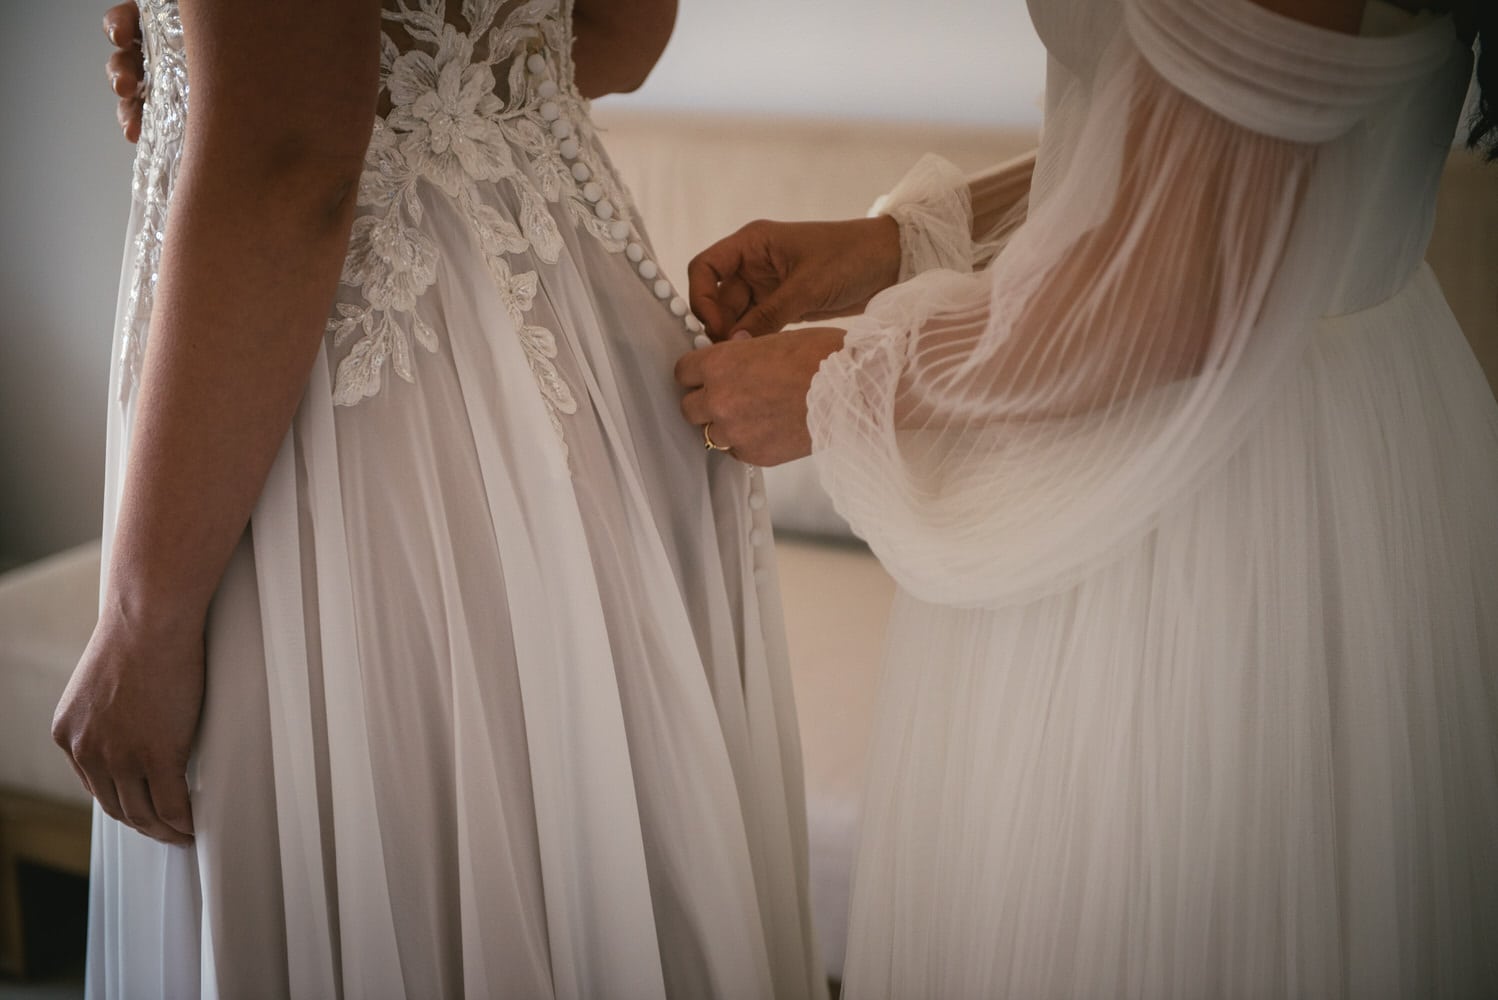 Bride's hands gracefully fastening the dress, anticipation for their Corfu elopement.